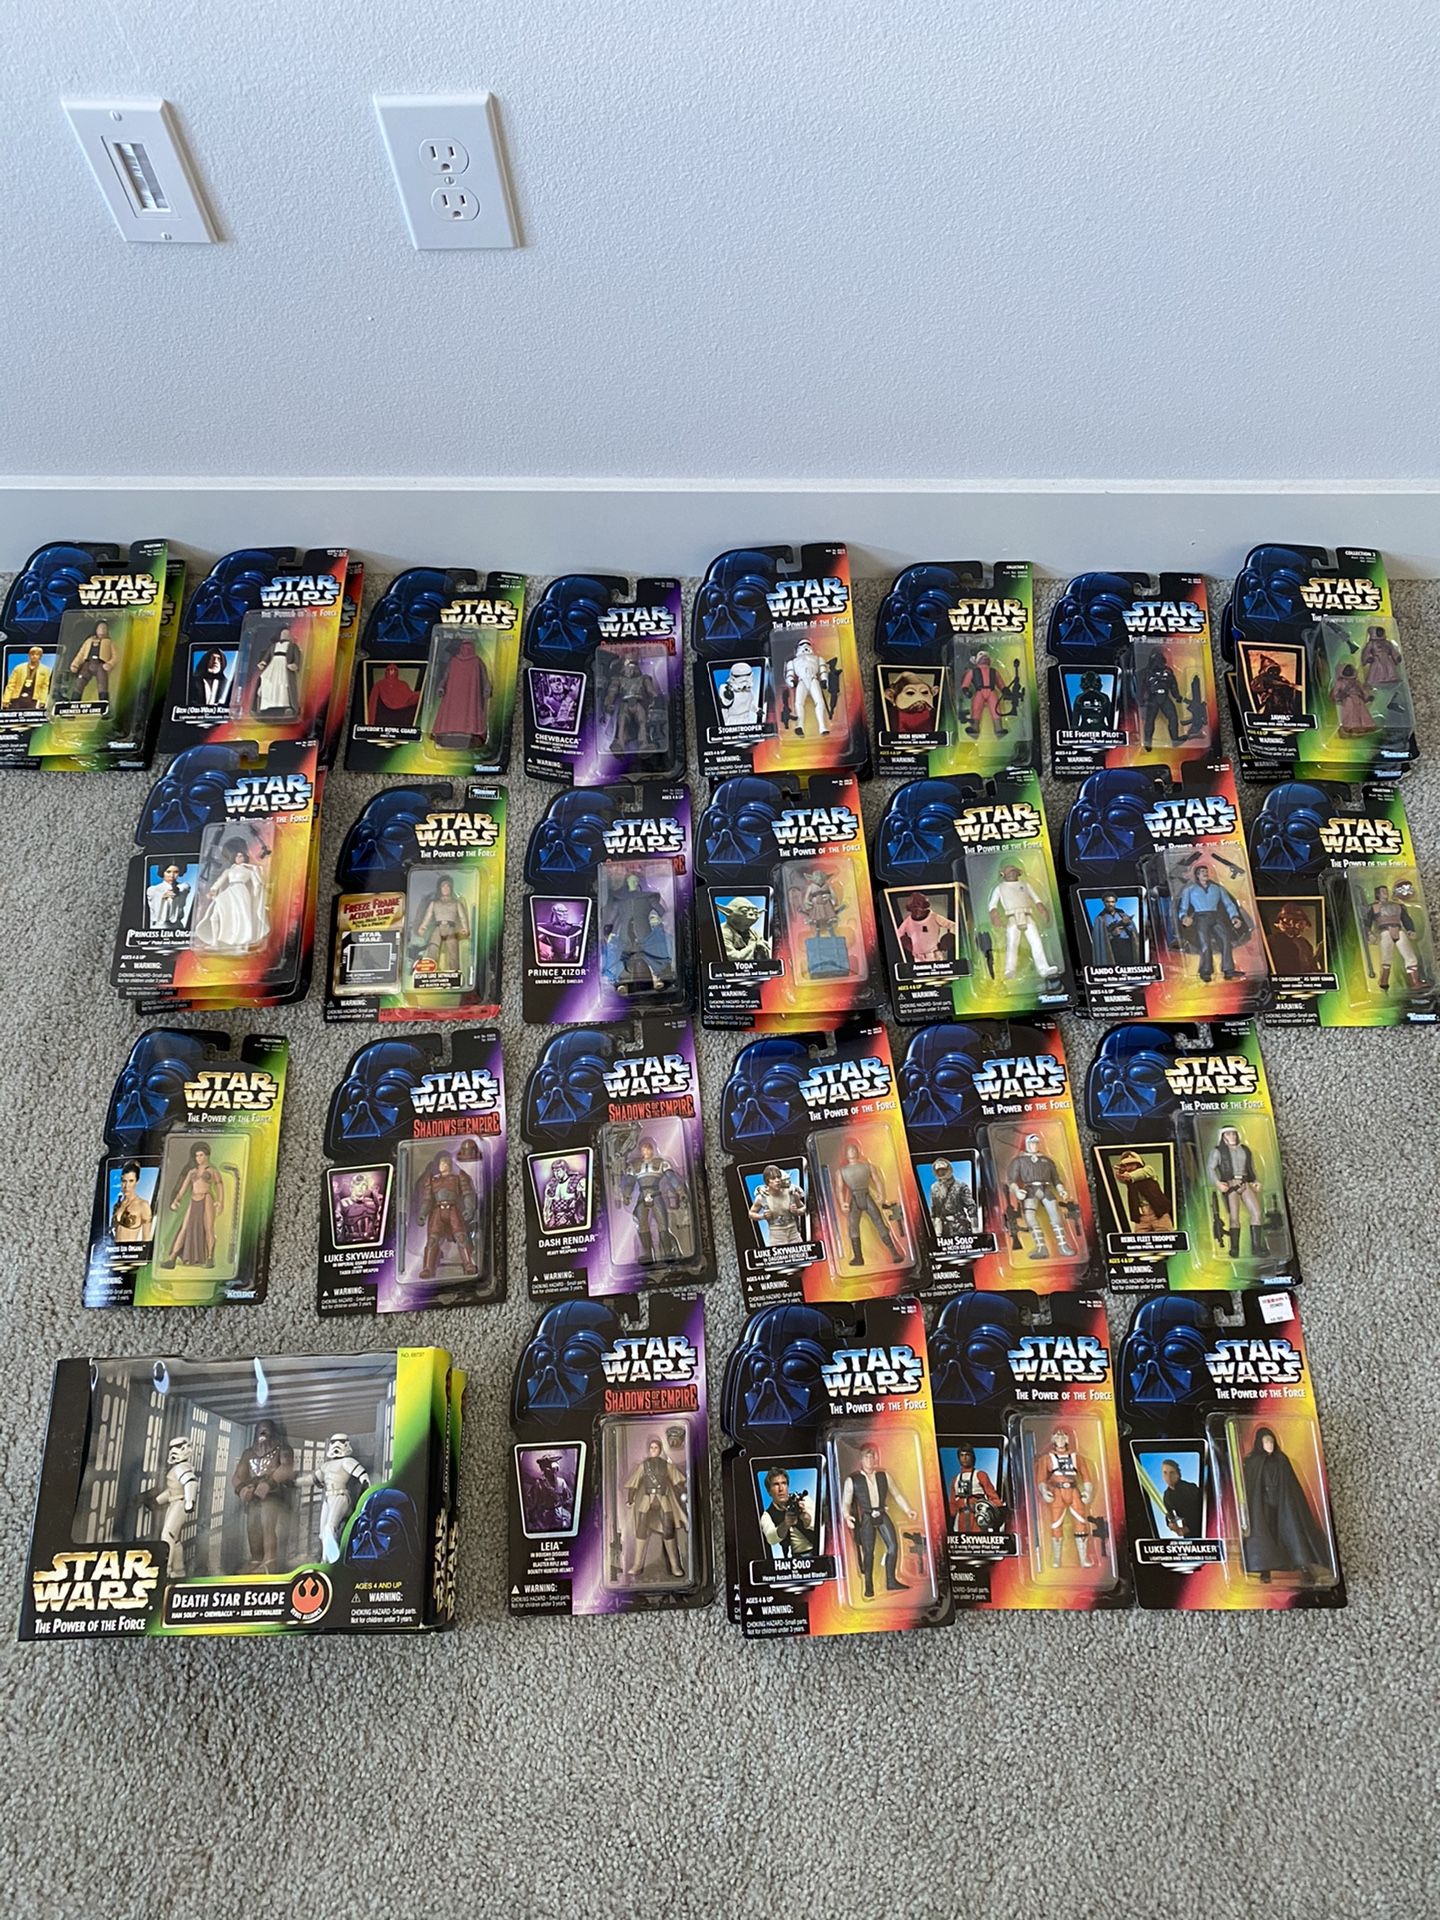 37 Star Wars The Power Of The Force Action Figures